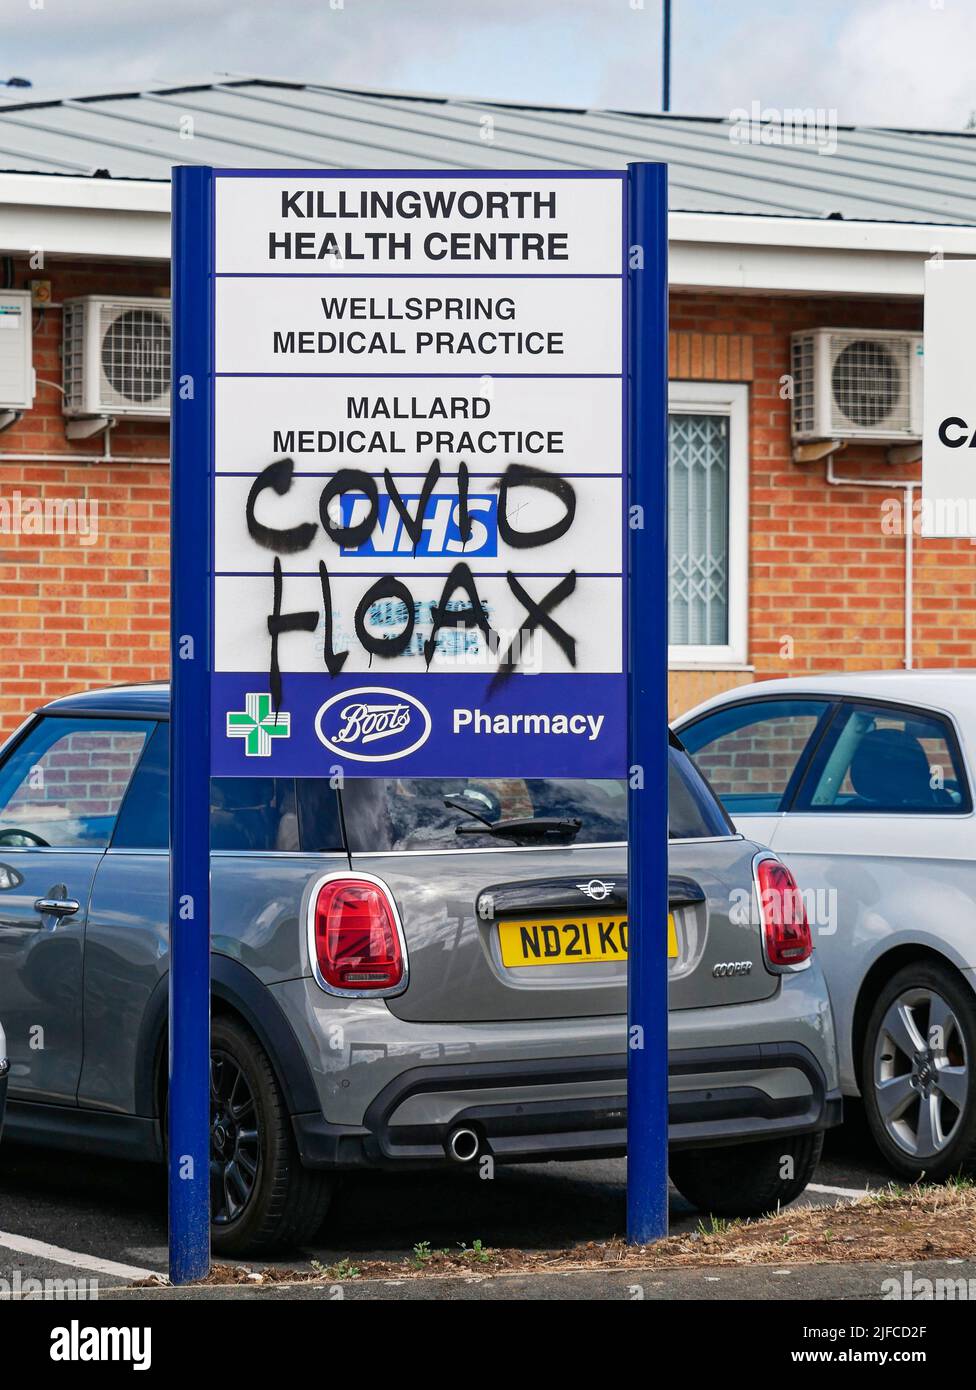 Covid hoax graffiti on a UK medical practice sign. Stock Photo